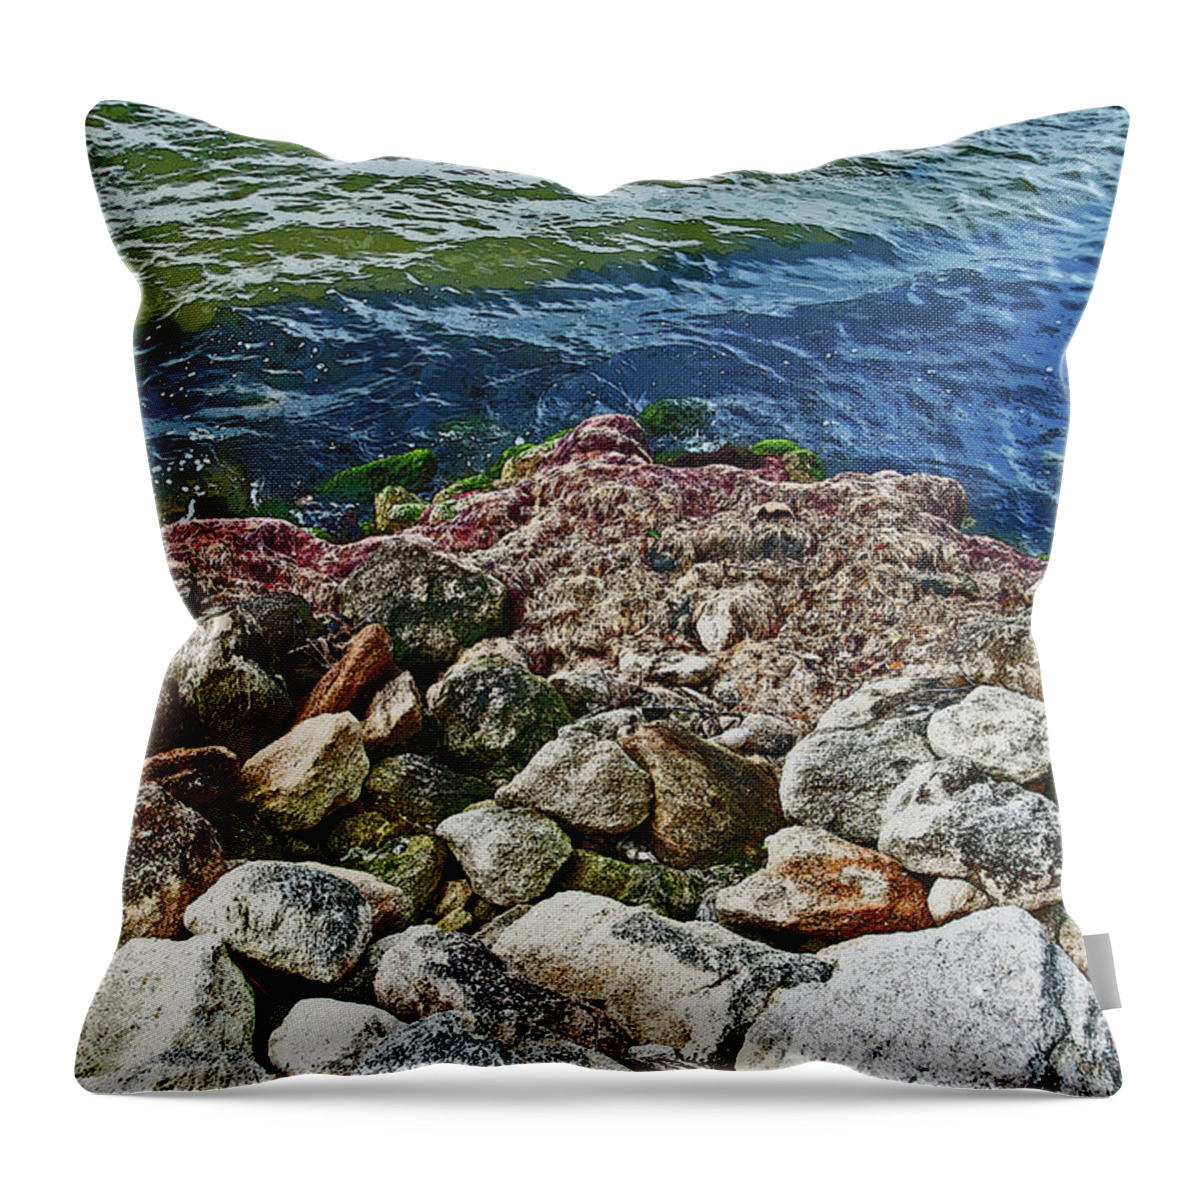 Boulder Throw Pillow featuring the photograph River Rocks by George D Gordon III